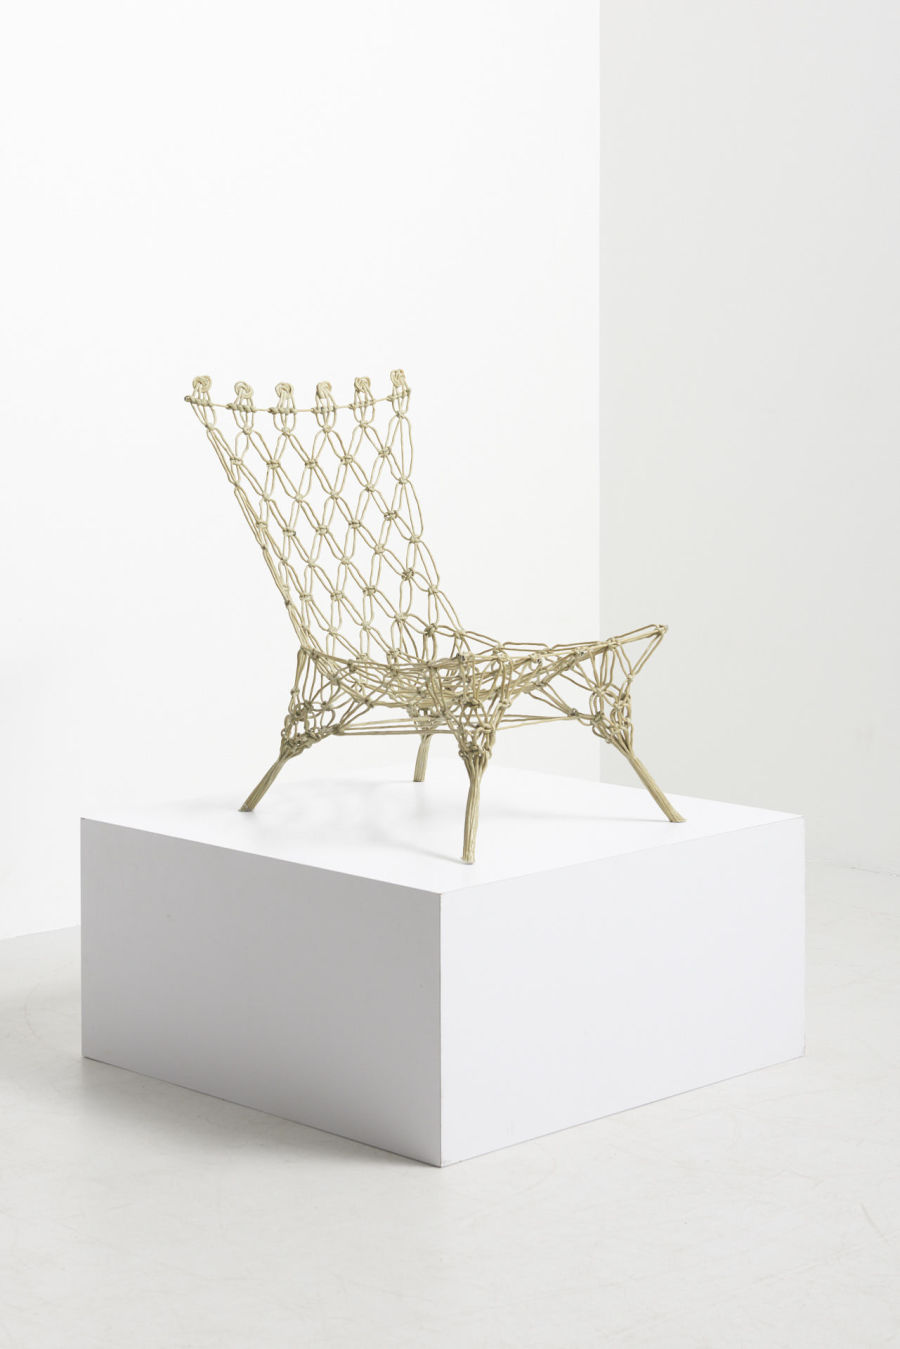 modestfurniture-vintage-2902-marcel-wanders-knotted-chair01